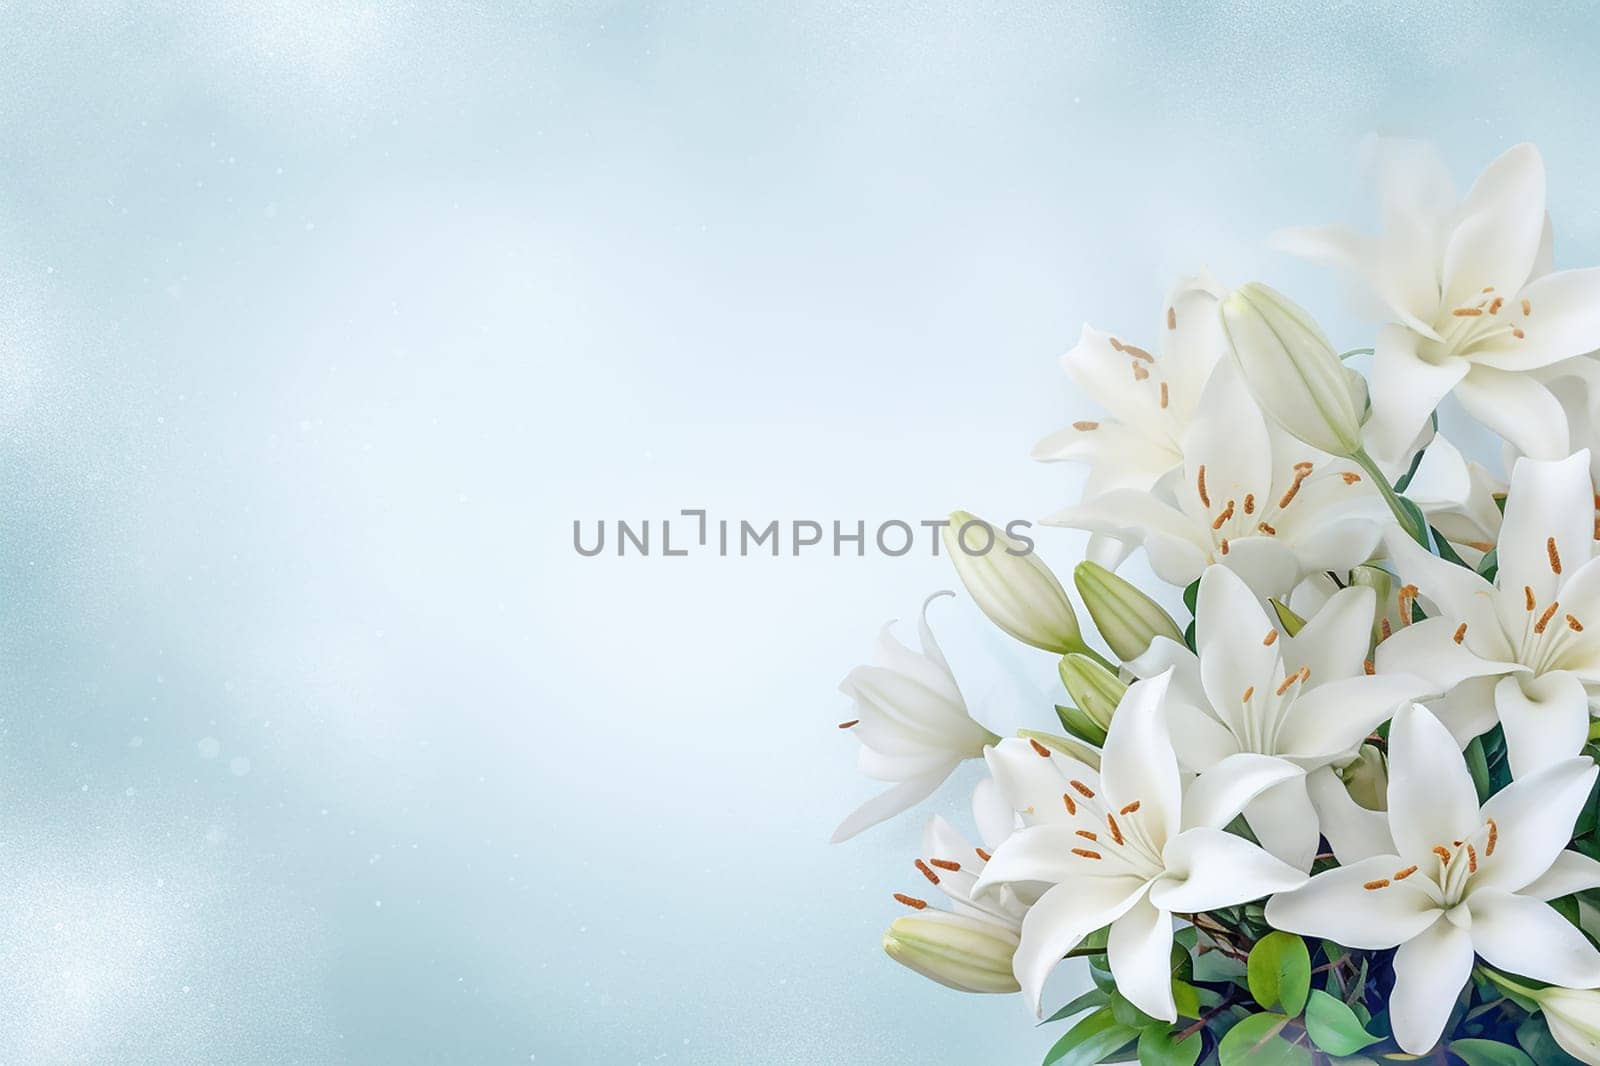 Elegant white lilies with a soft blue background, giving a serene vibe. by Hype2art